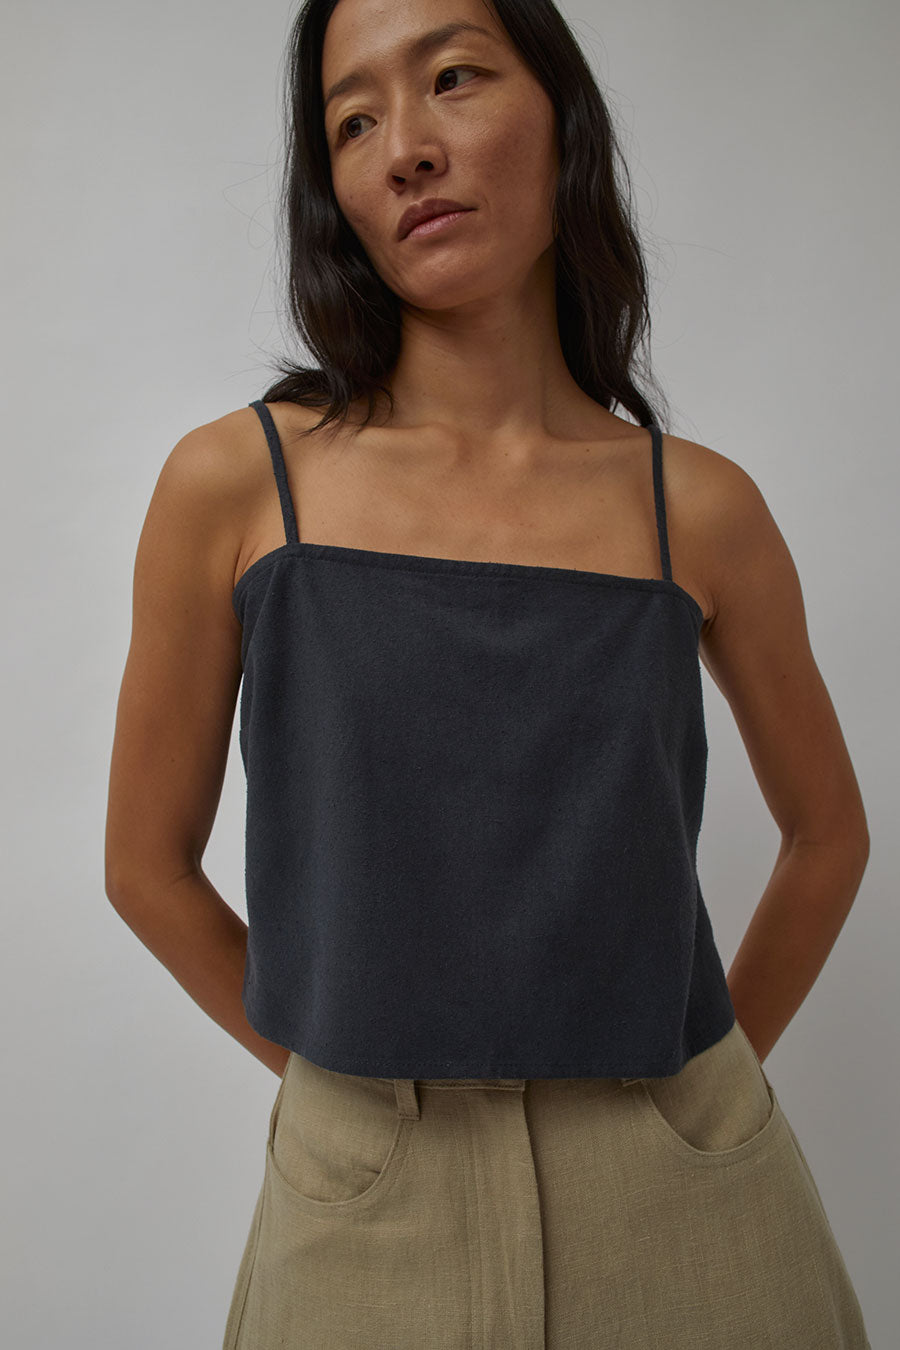 Zii Ropa Cea Top in Washed Black